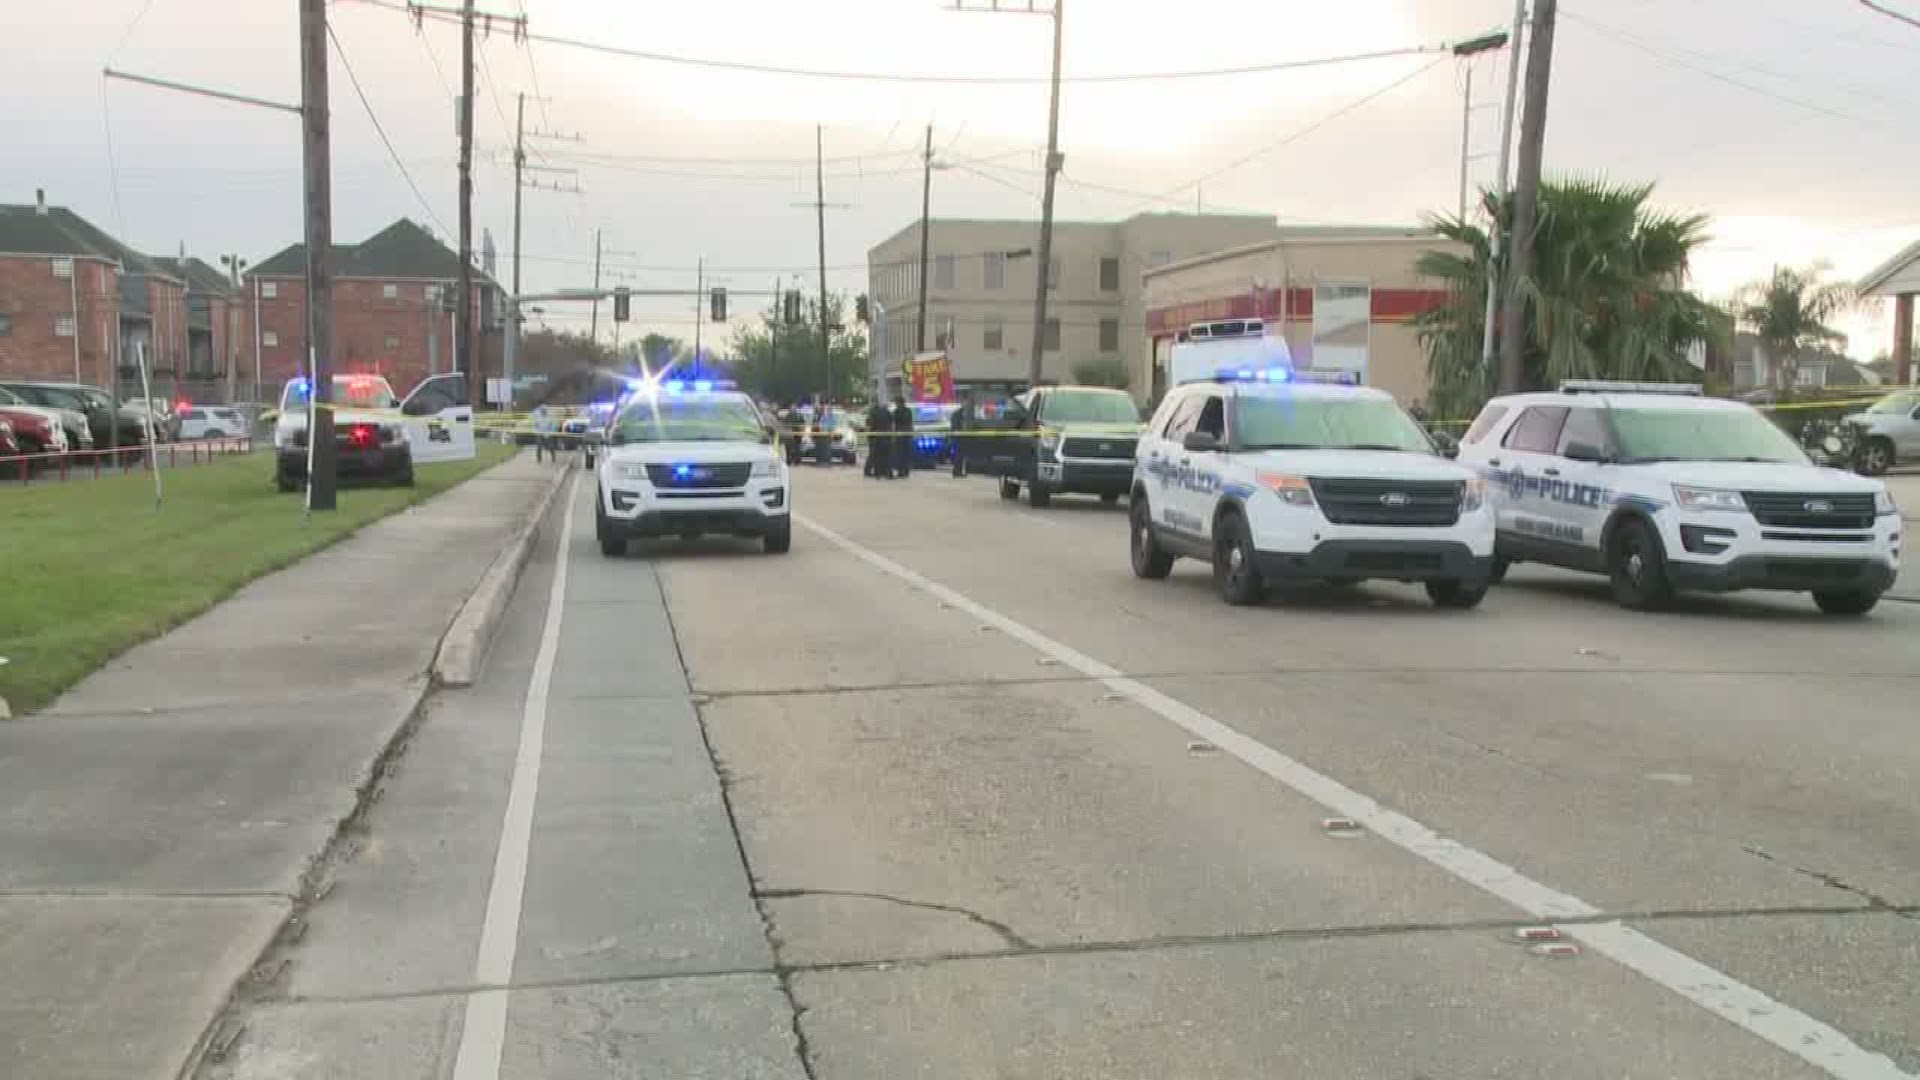 There was heavy police activity off N. Causeway Boulevard as officers responded to the scene.